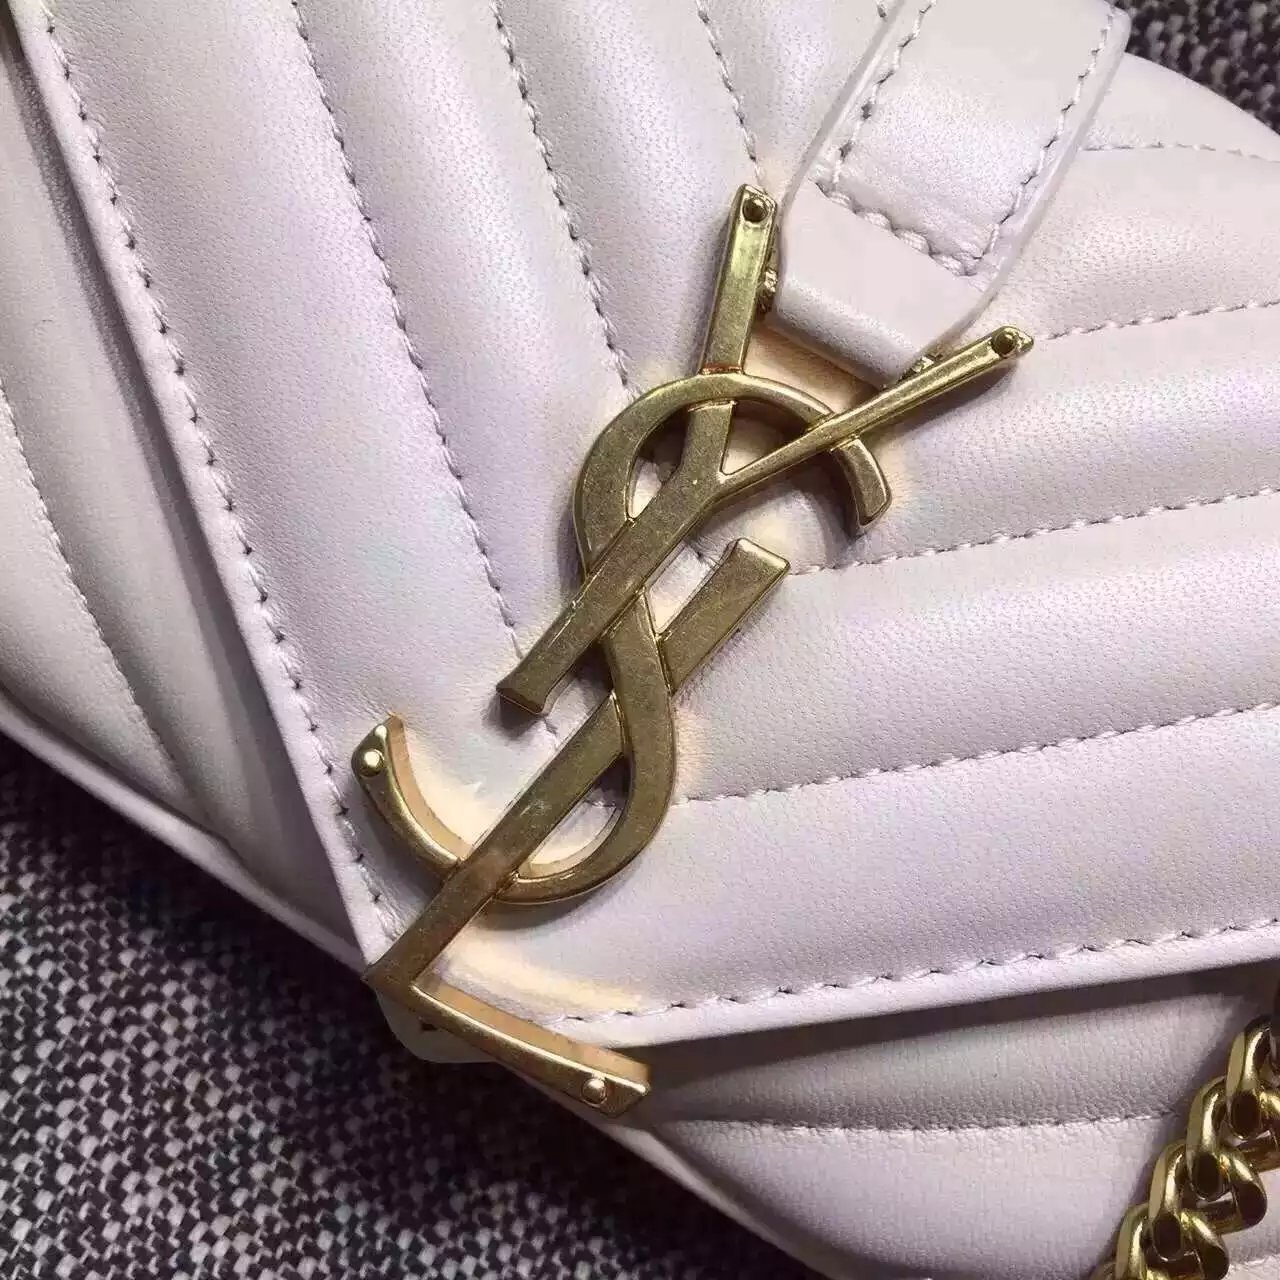 2016 Cheap YSL Outsale with Free Shipping-Saint Laurent Classic Baby Monogram Satchel in White Matelasse Leather with Gold Hardware - Click Image to Close